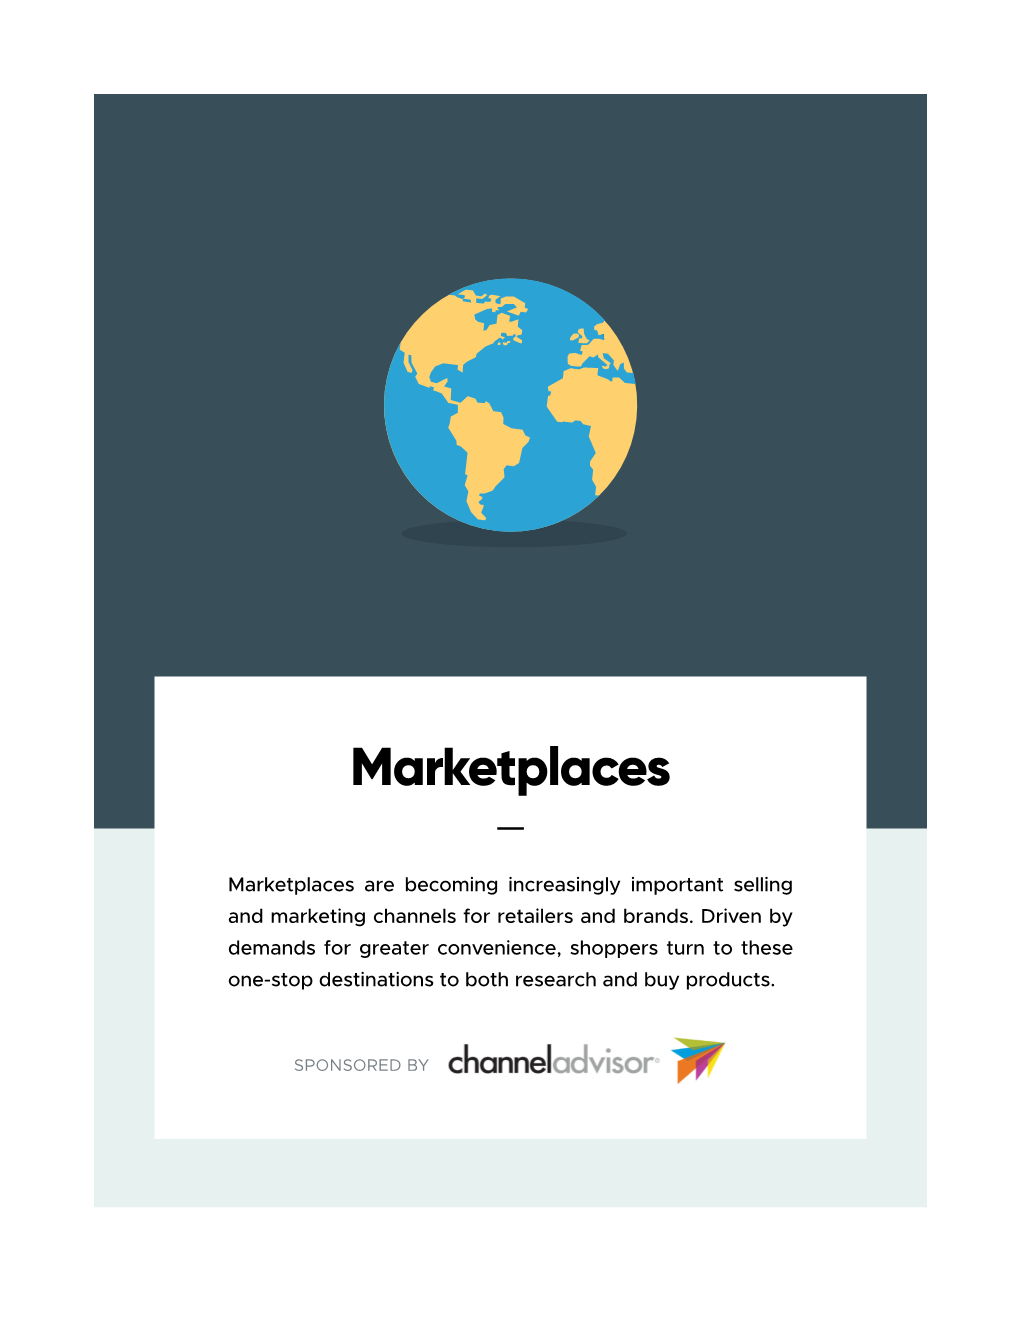 Marketplaces – Marketplaces Are Becoming Increasingly Important Selling and Marketing Channels for Retailers and Brands